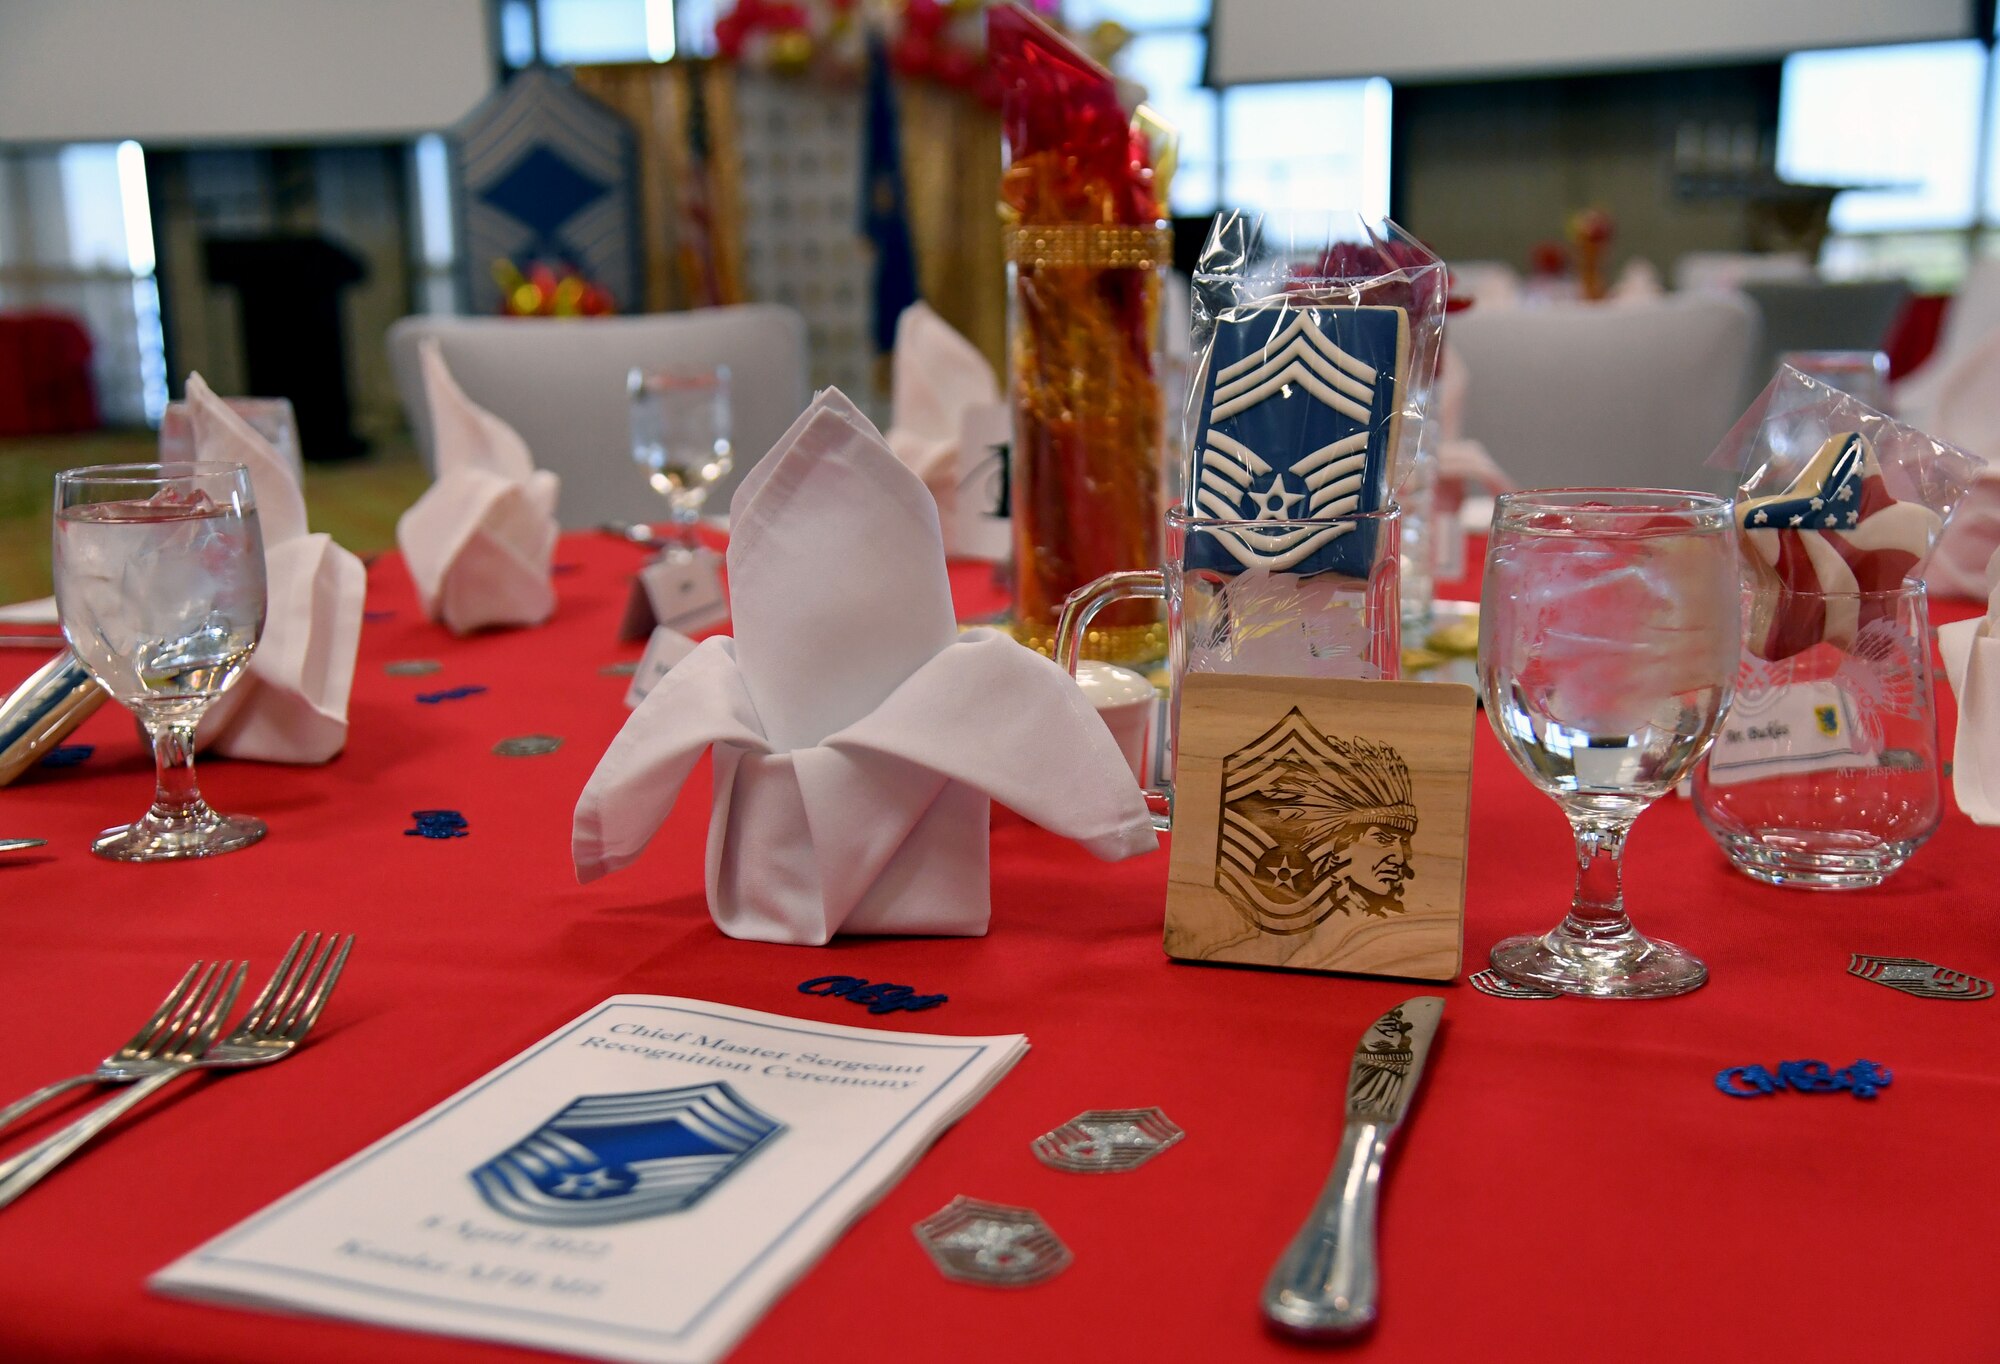 Event programs, cookies and coasters are displayed during the Chief Master Sergeant Recognition Ceremony inside the Bay Breeze Event Center at Keesler Air Force Base, Mississippi, April 8, 2022. Four Keesler Airmen earned their chief master sergeant stripe during the 2022 promotion release. Chief master sergeants make up one percent of the Air Force enlisted force. (U.S. Air Force photo by Kemberly Groue)